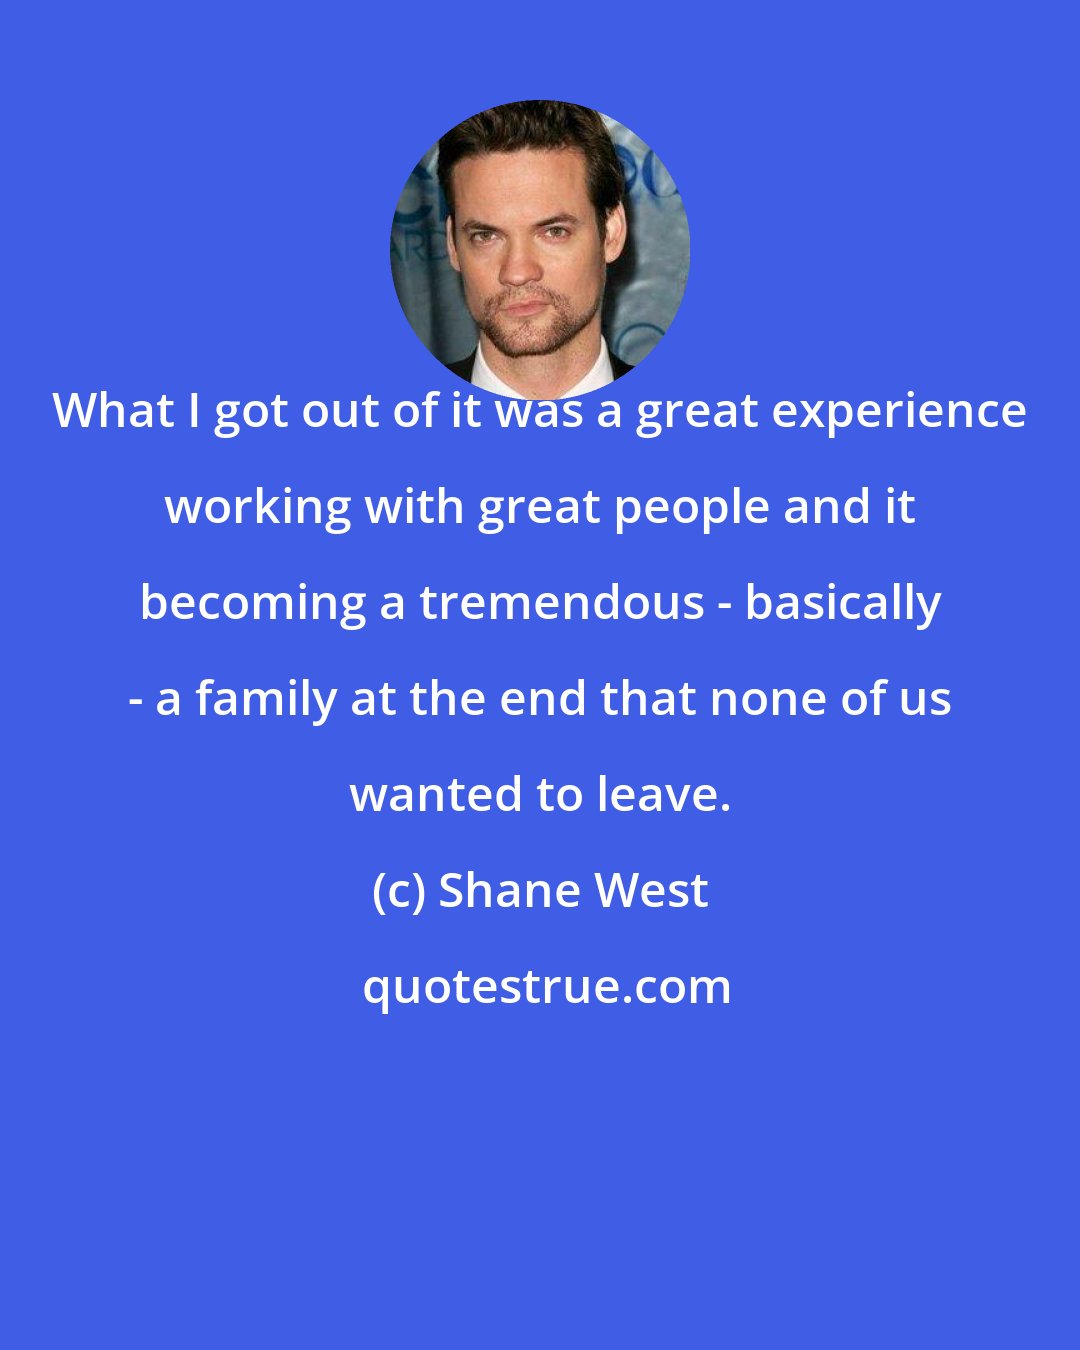 Shane West: What I got out of it was a great experience working with great people and it becoming a tremendous - basically - a family at the end that none of us wanted to leave.